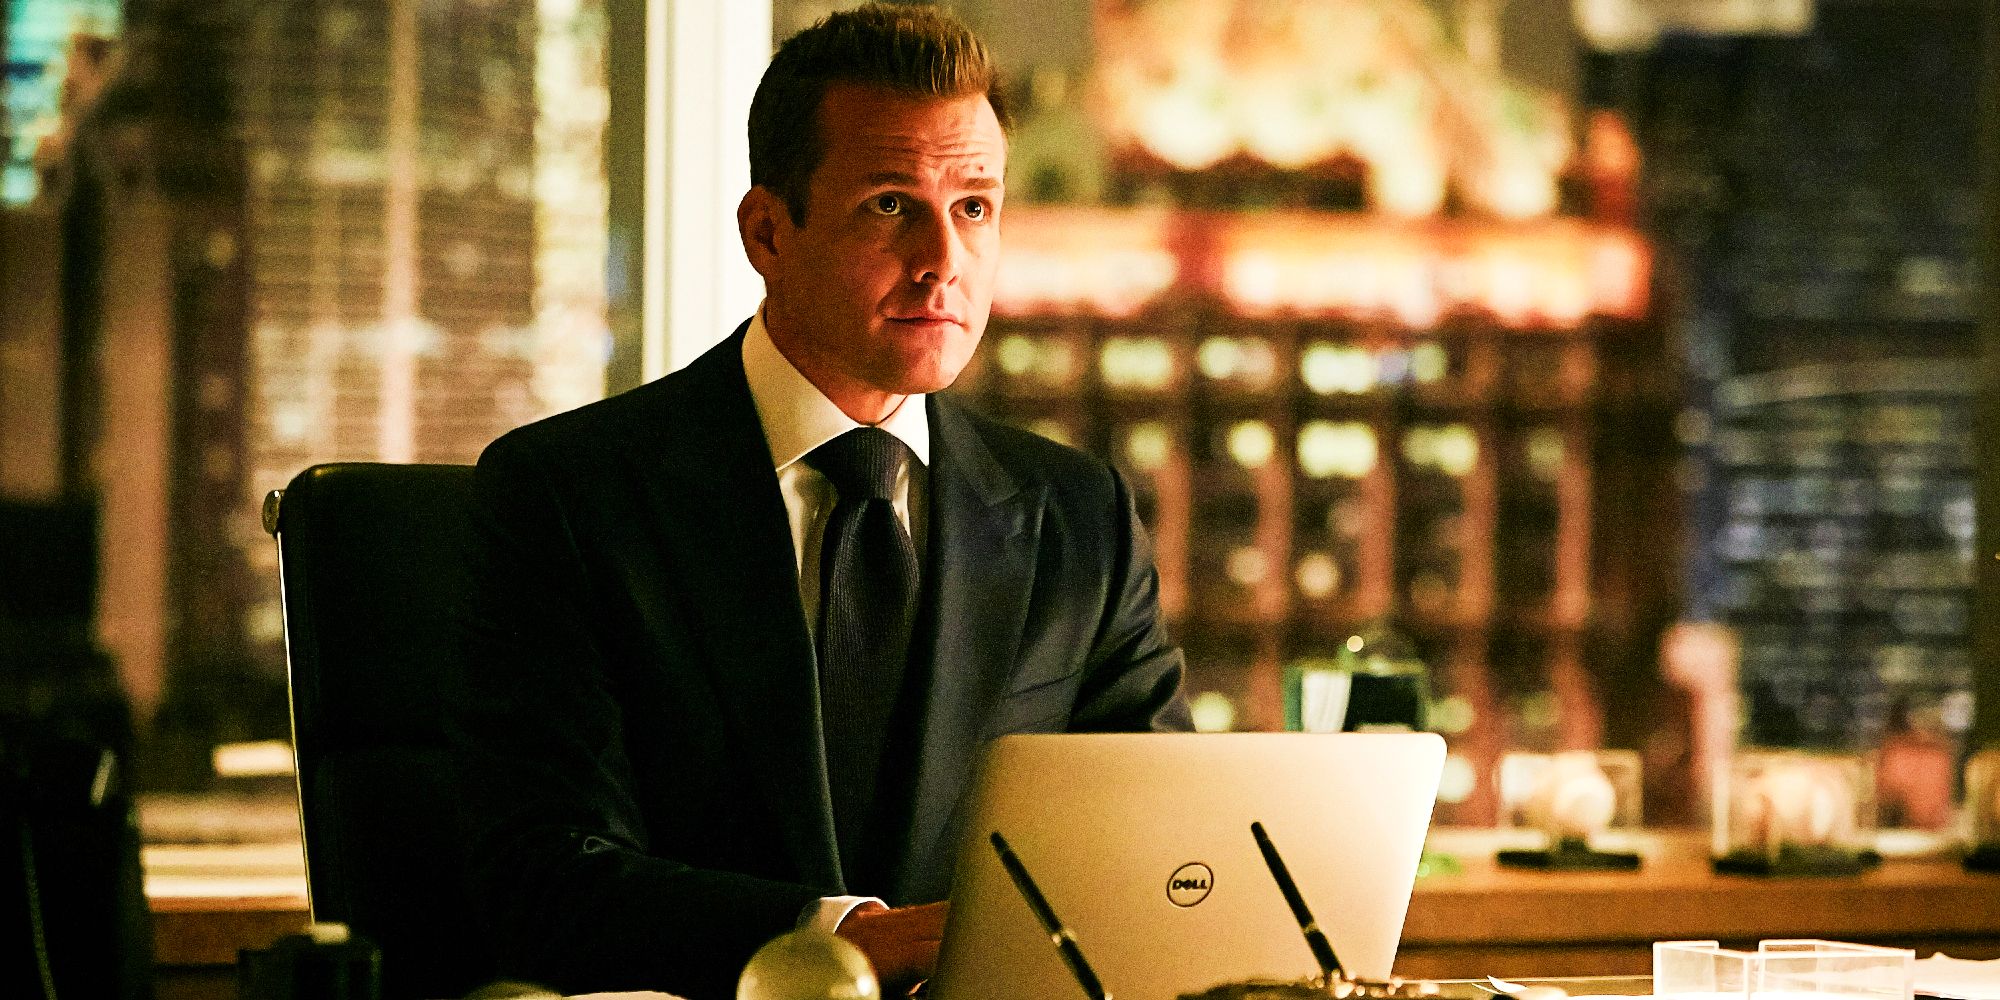 Gabriel Macht as Harvey Spector sitting at computer in Suits season 6 episode 6 "Spain"